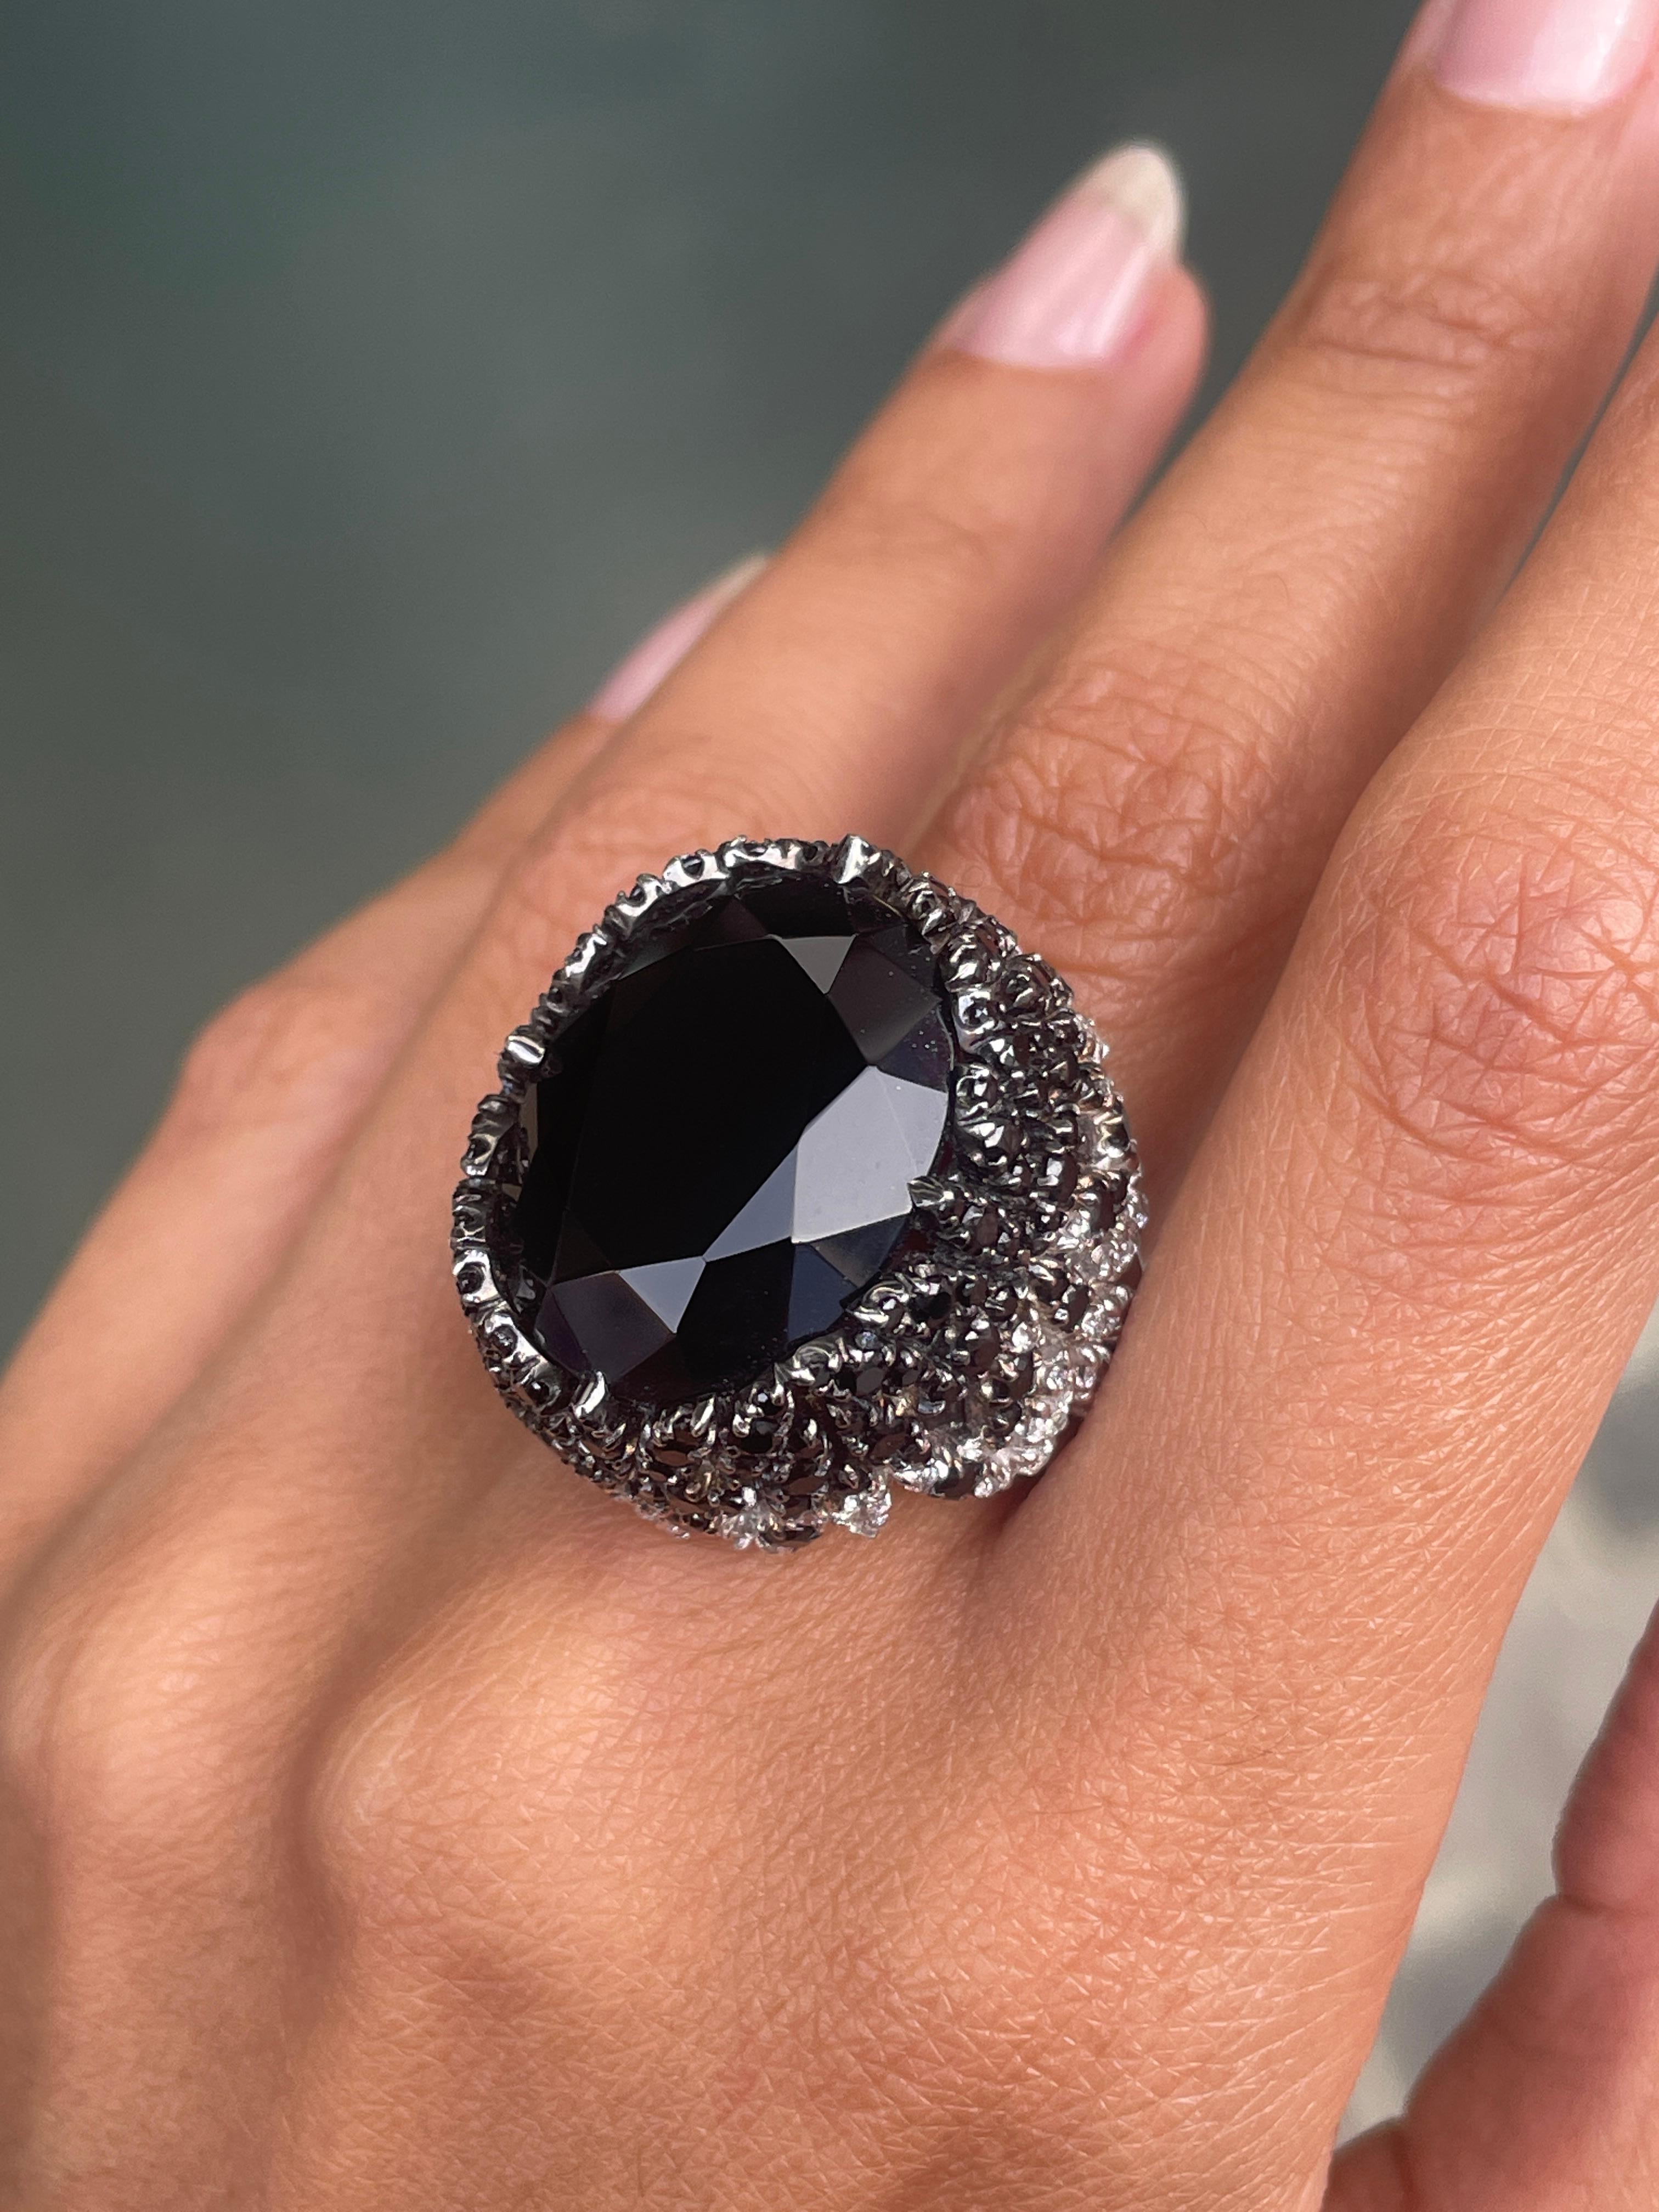 Pasquale Bruni 'Ghirlanda' Onyx, Black Spinel and Diamond 18K White Gold Ring For Sale 1